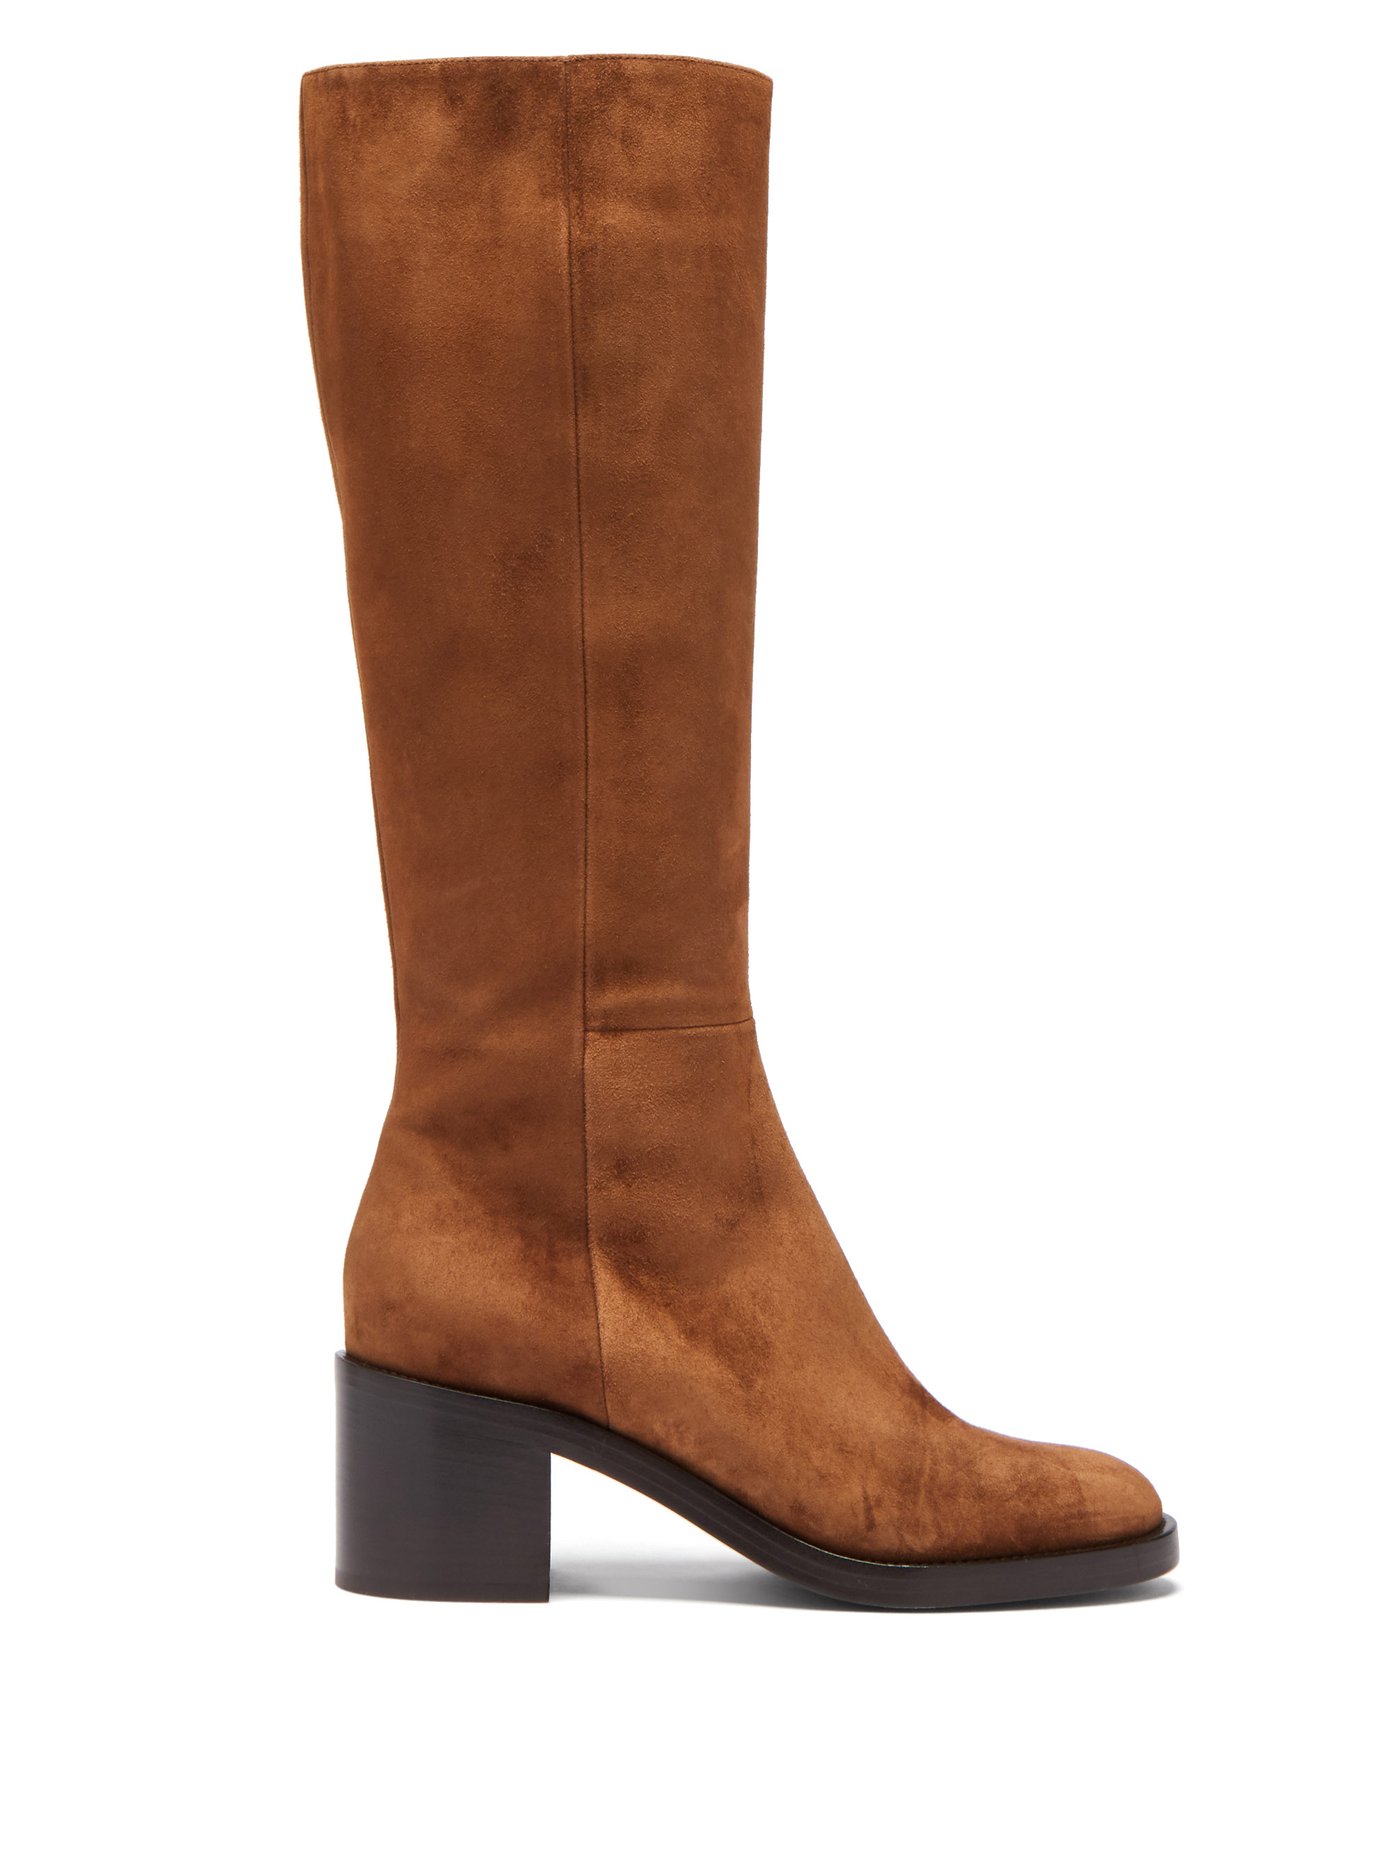 tan suede high boots